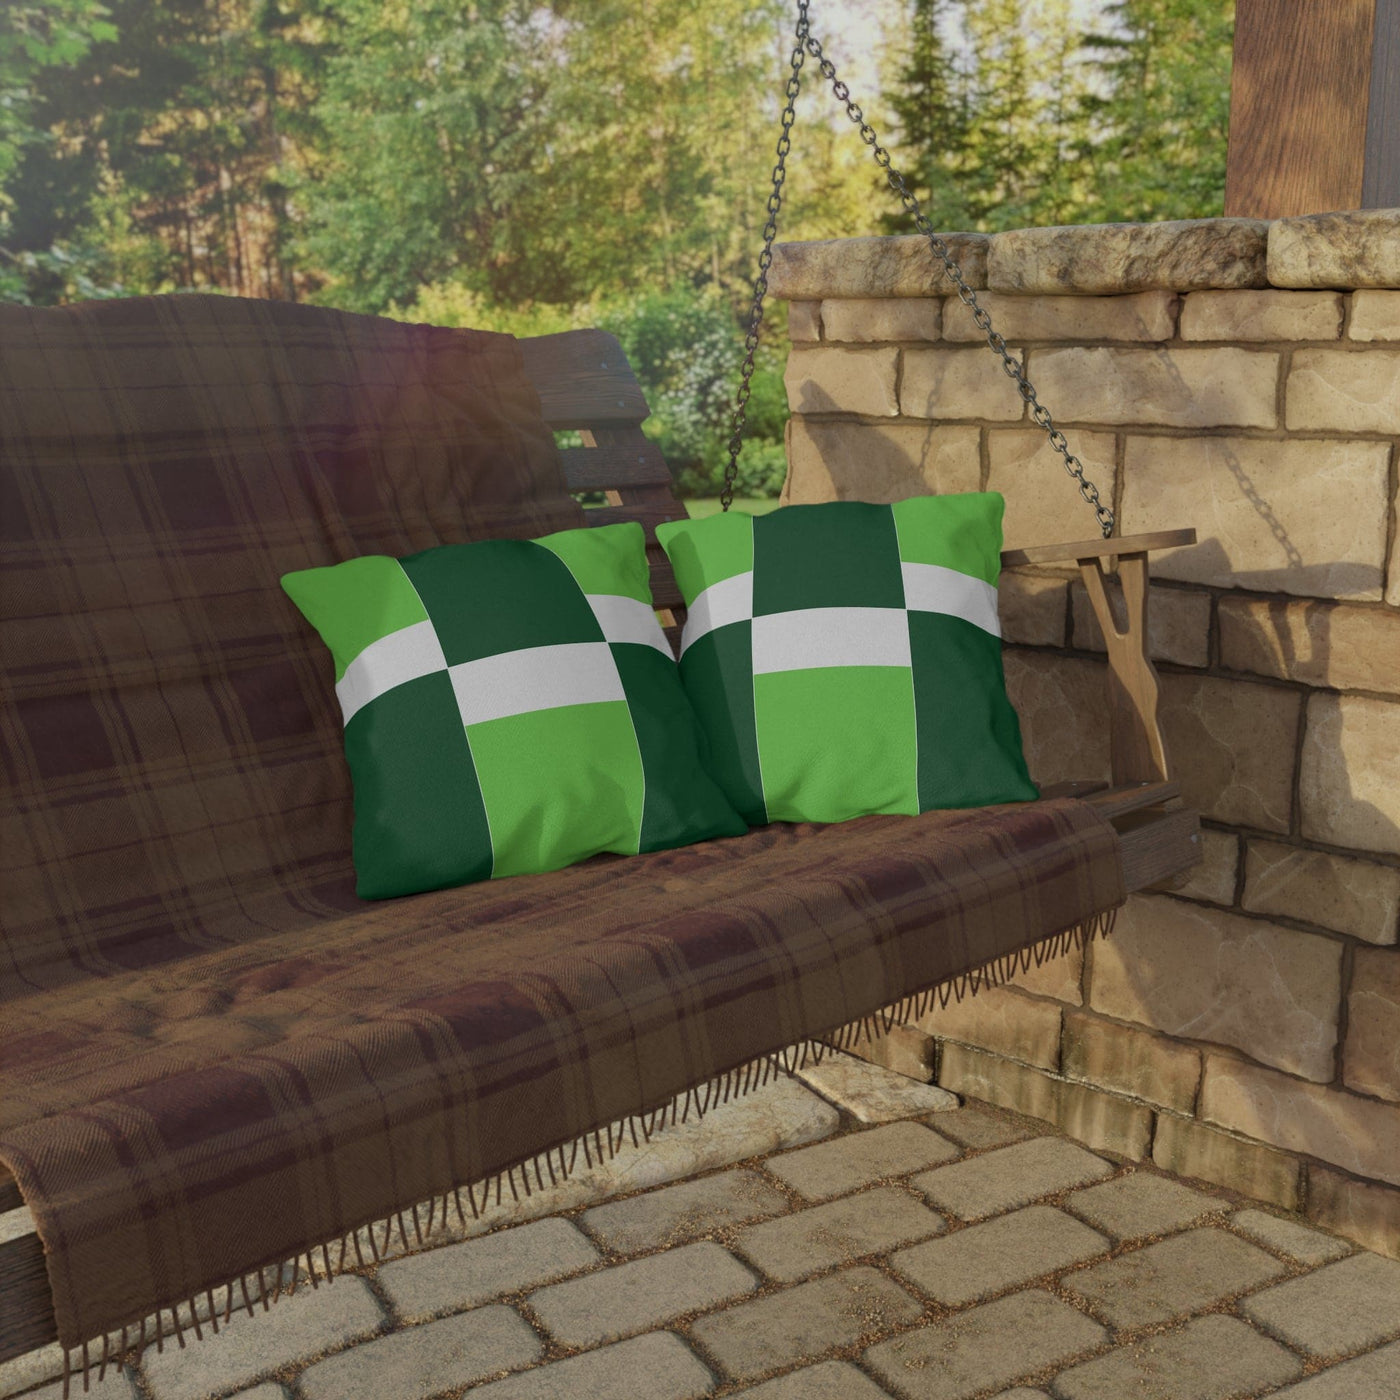 Decorative Outdoor Pillows - Set Of 2 Lime Forest Irish Green Colorblock